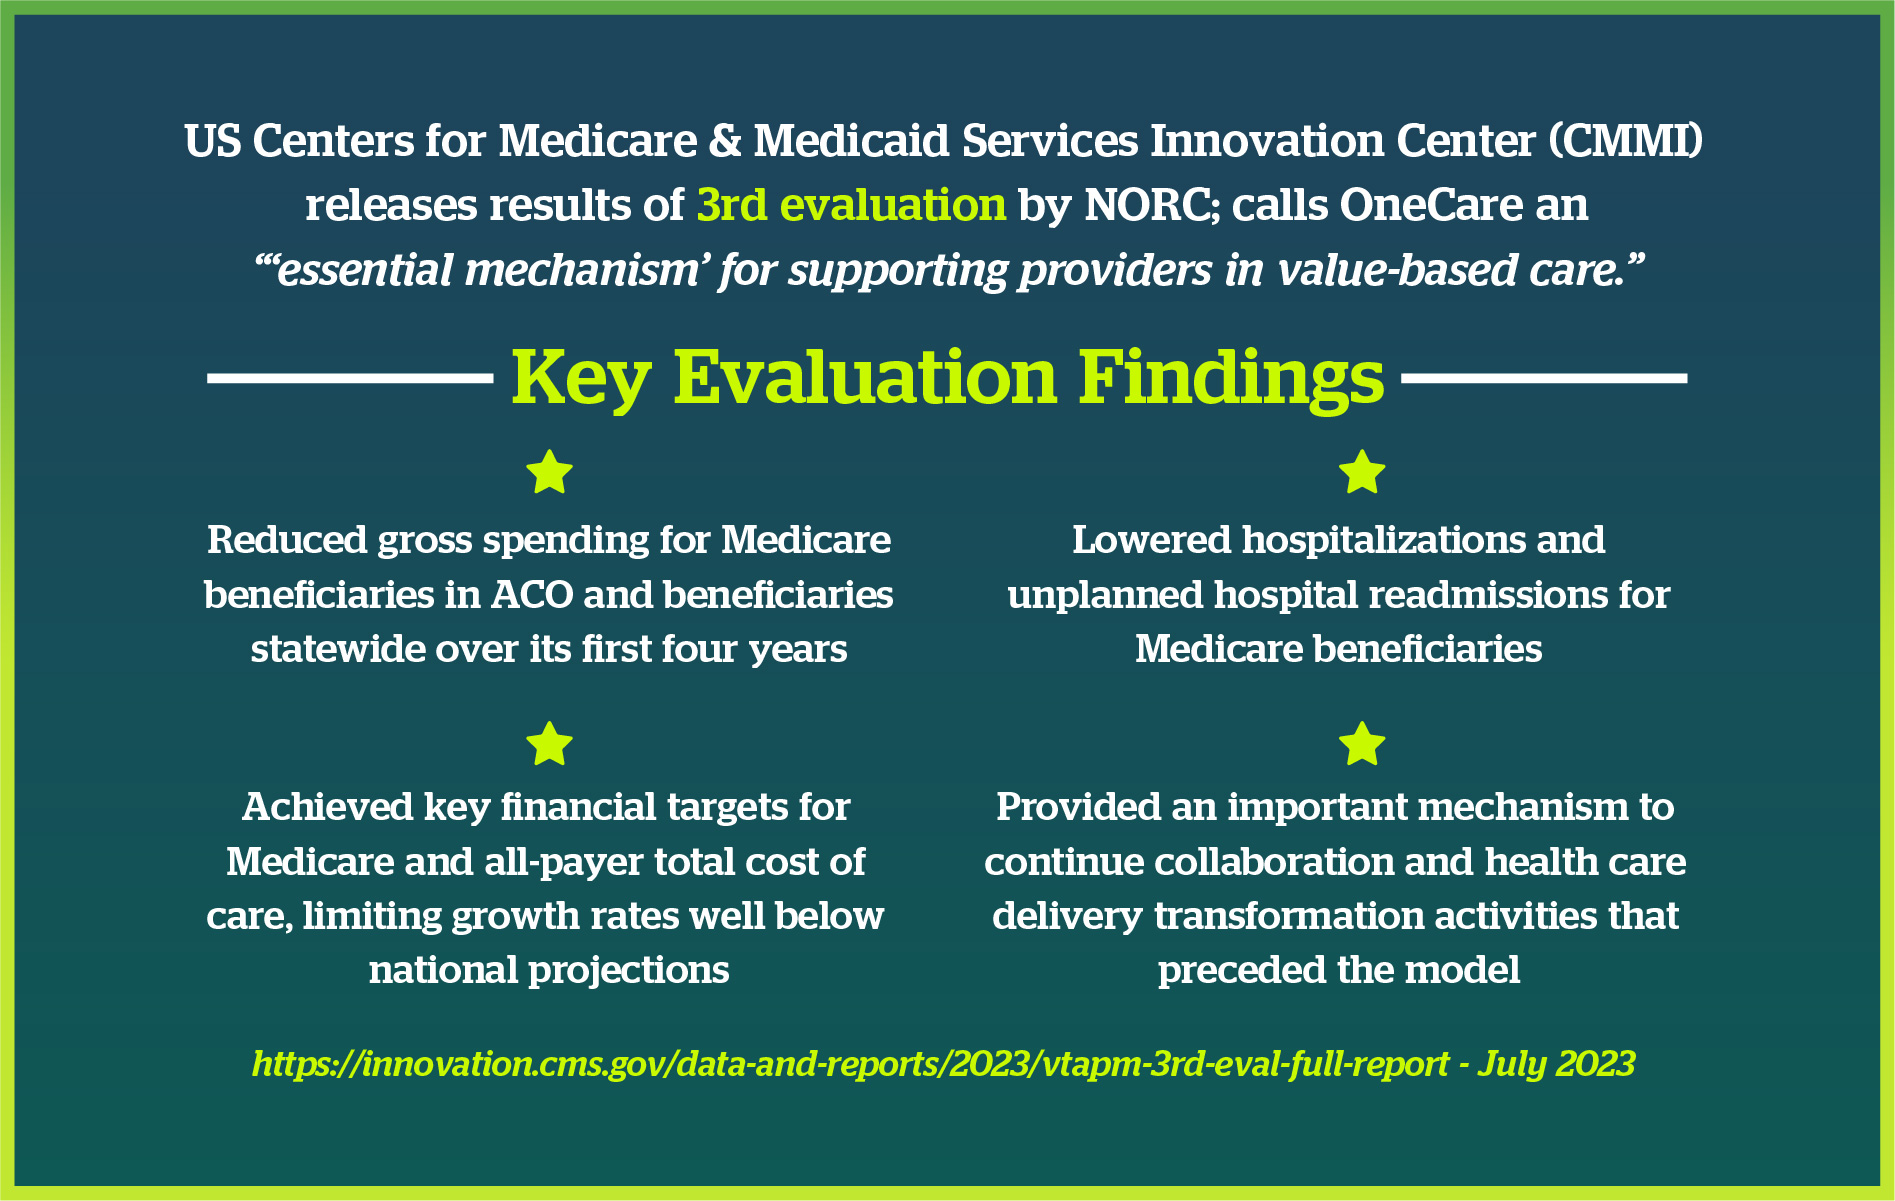 Image card - US Centers for Medicare & Medicaid Services Innovation Center (CMMI)  releases results of 3rd evaluation by NORC; calls OneCare an essential mechanism’ for supporting providers in value-based care. Key Evaluation Findings follow on this page!